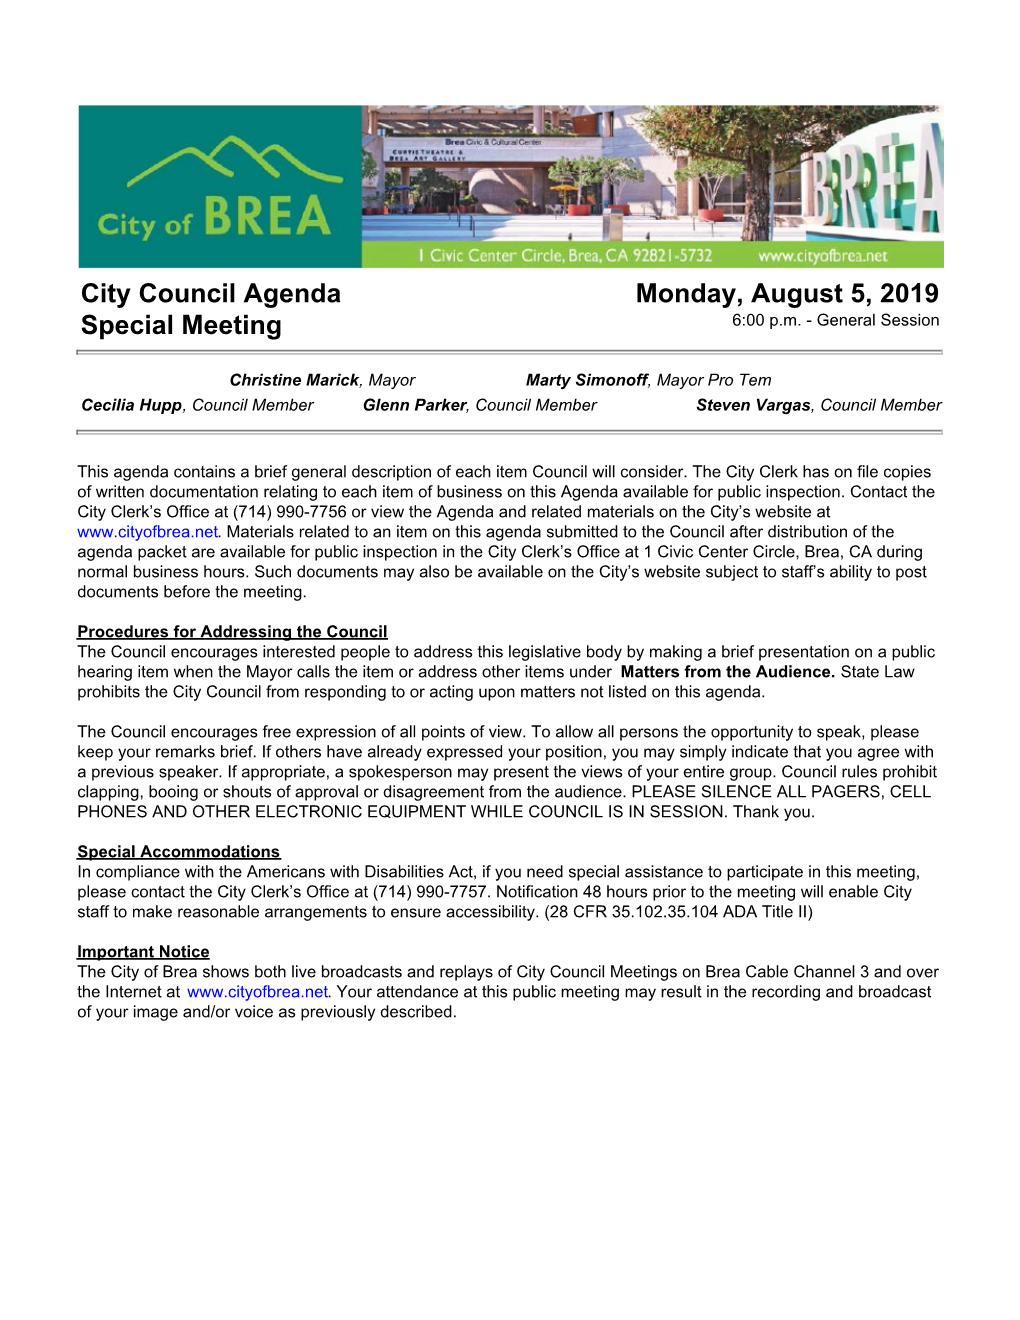 City Council Agenda Special Meeting Monday, August 5, 2019